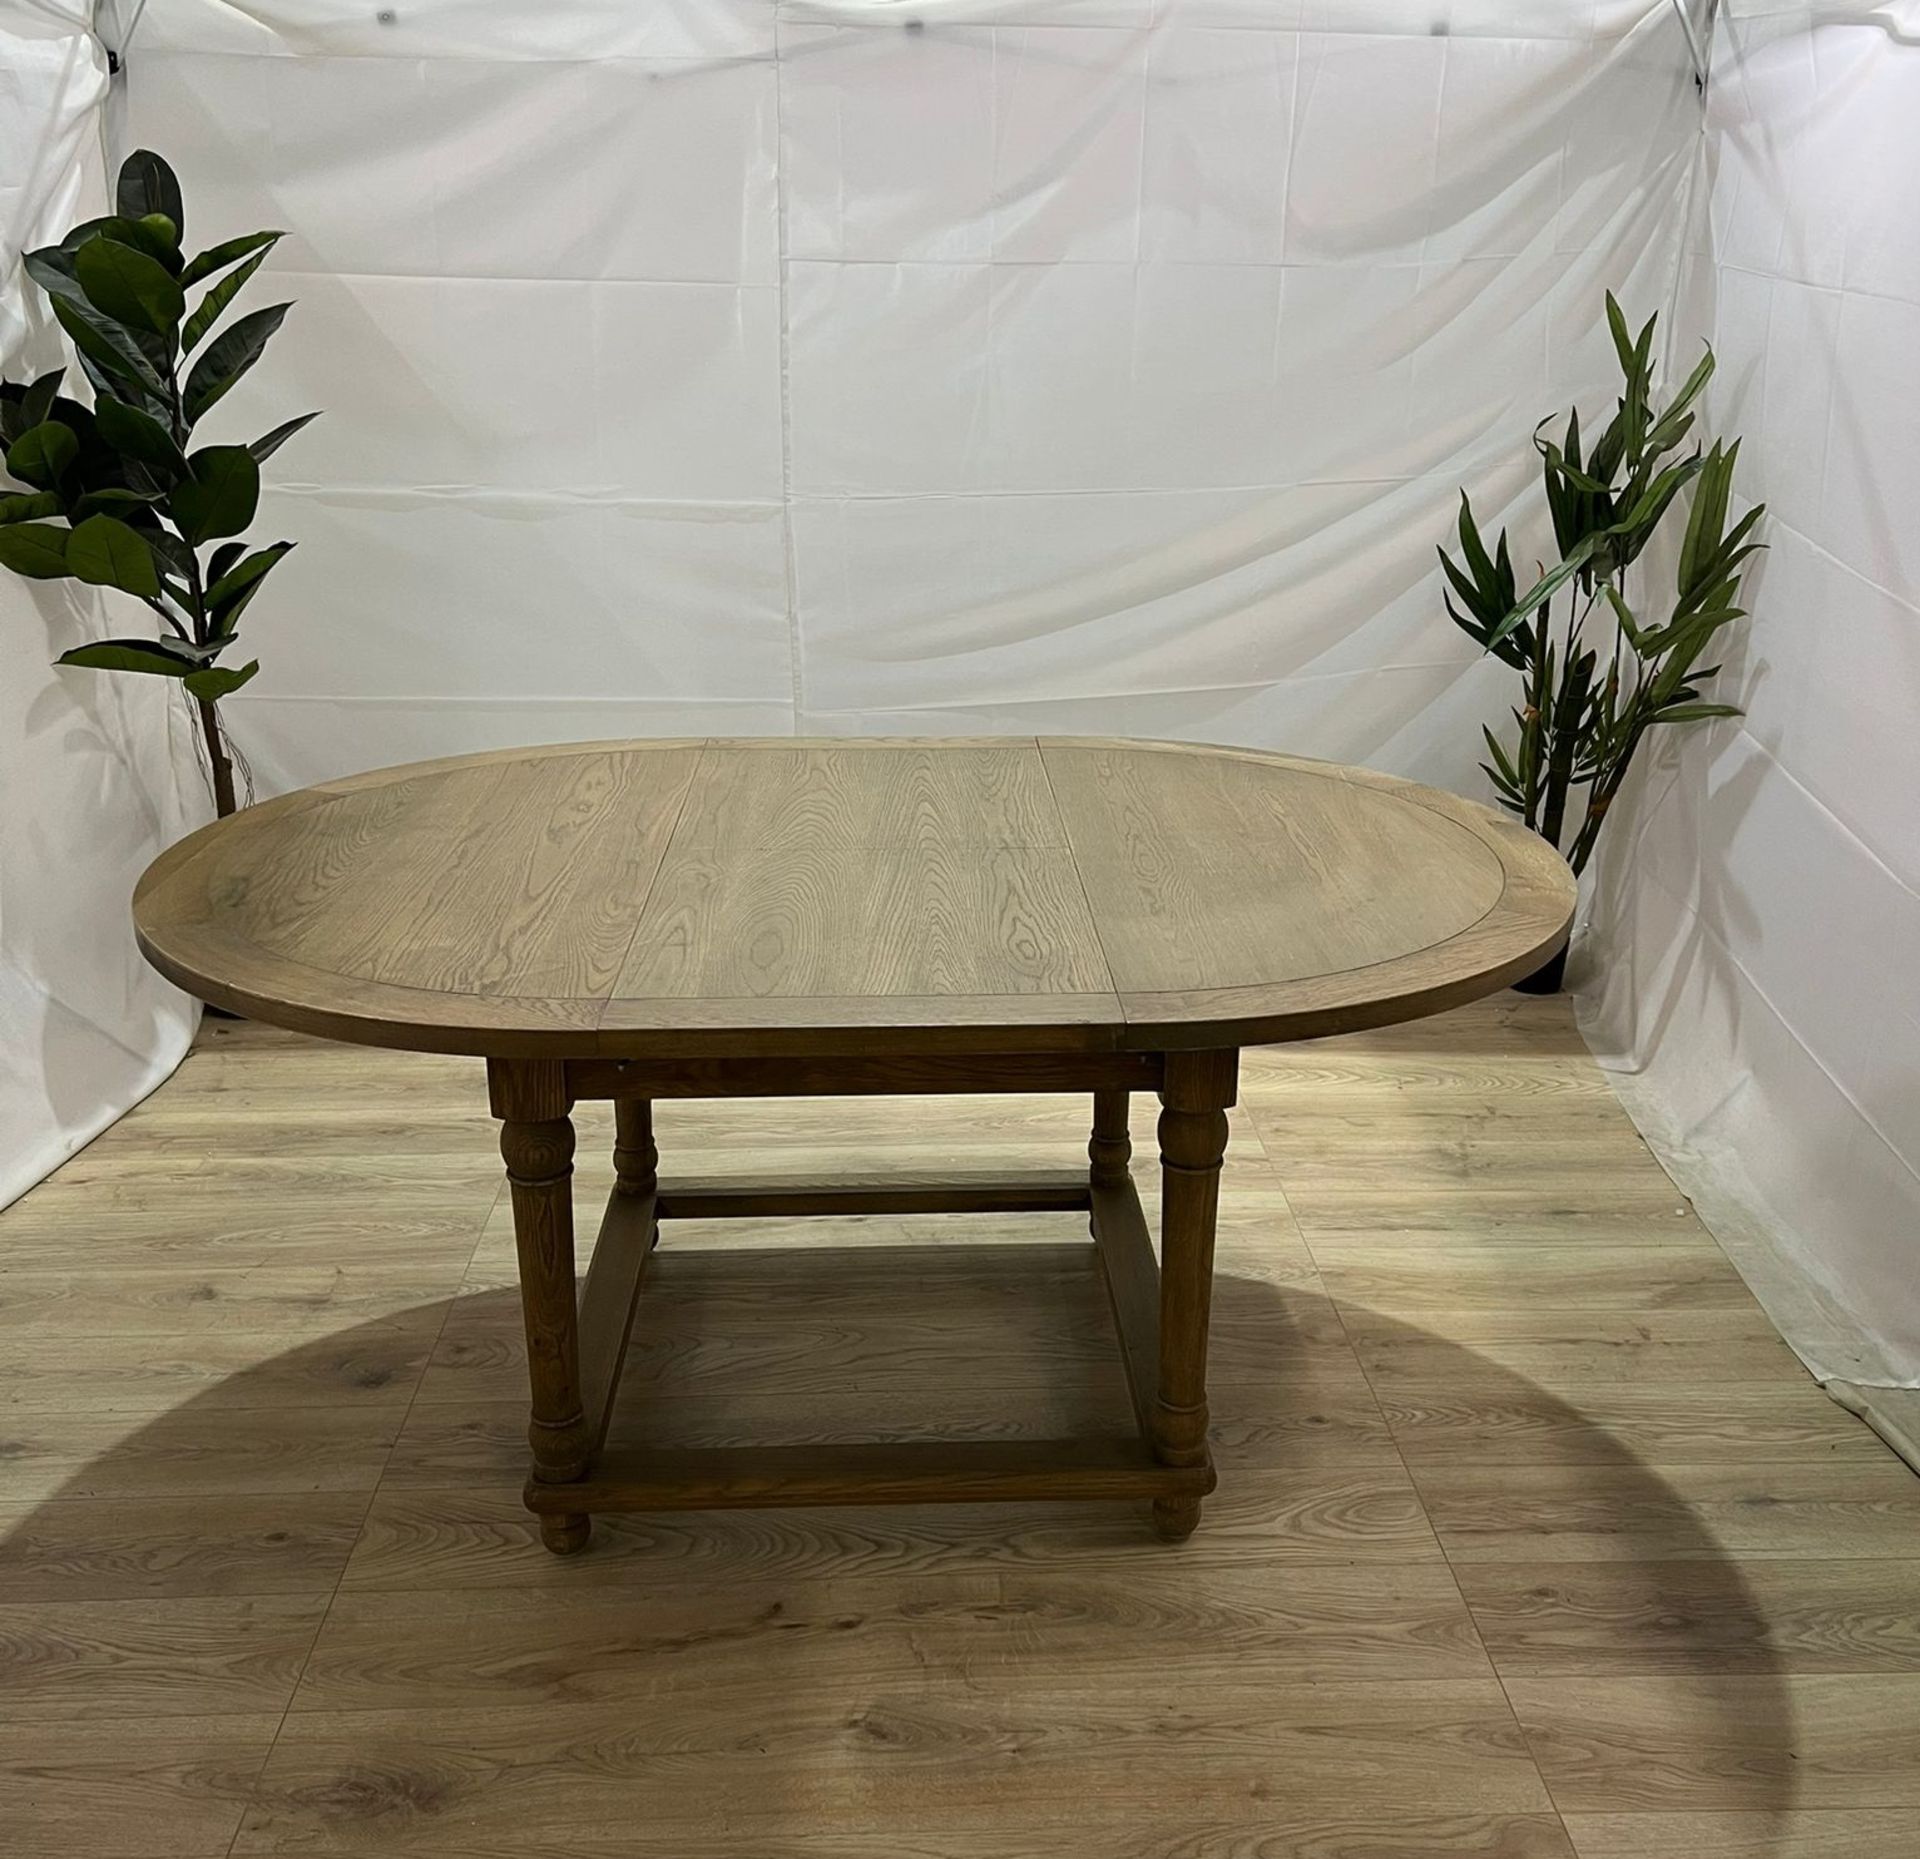 OKA Radnor Dining Table Product Details: Dimensions (standard): 120 x 120 cm Dimensions (